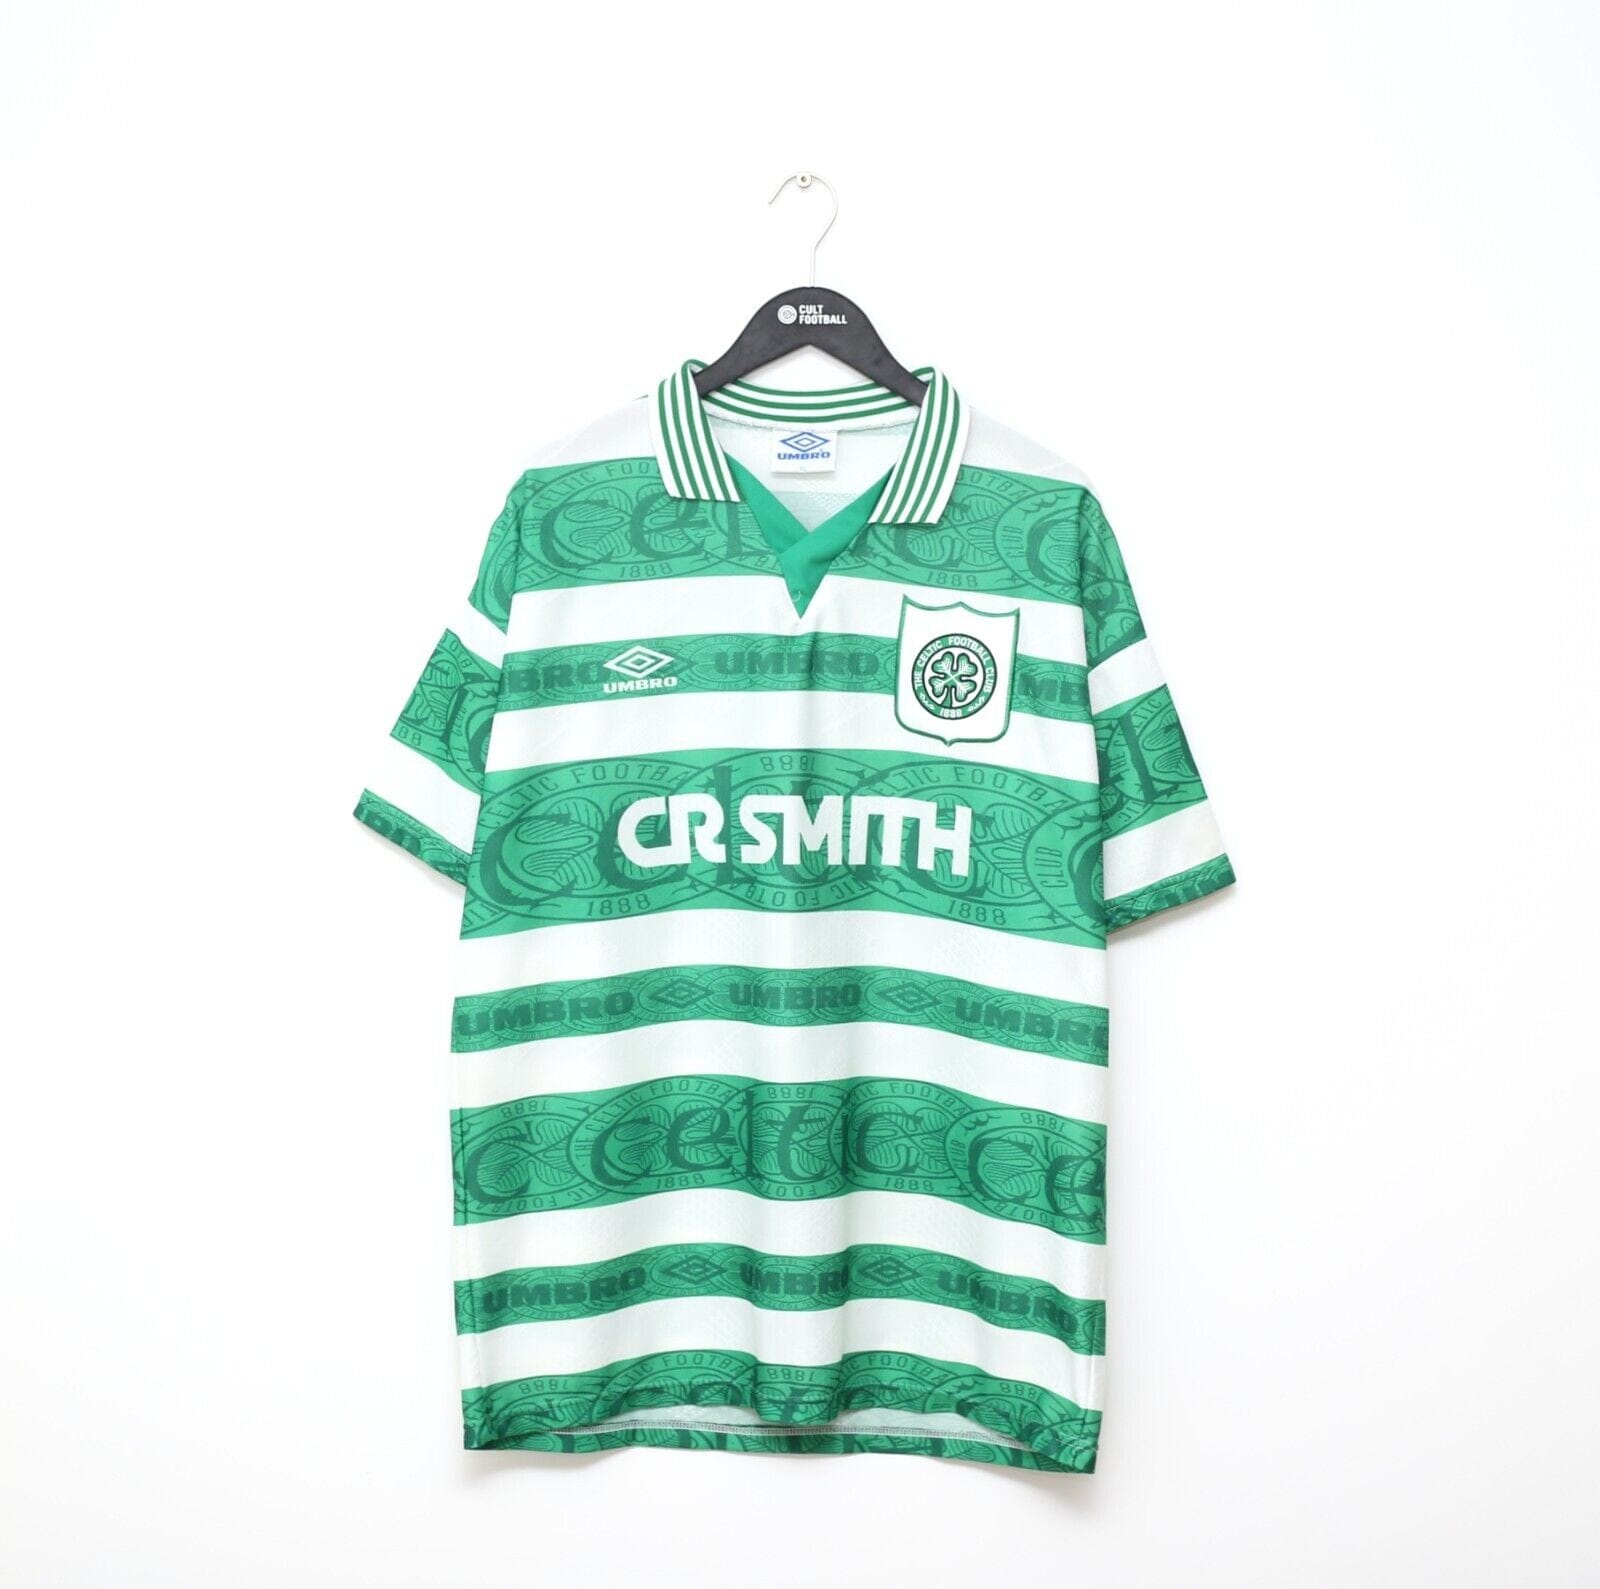 1995/96 Celtic Home Football Shirt / Old Classic Umbro Soccer Jersey